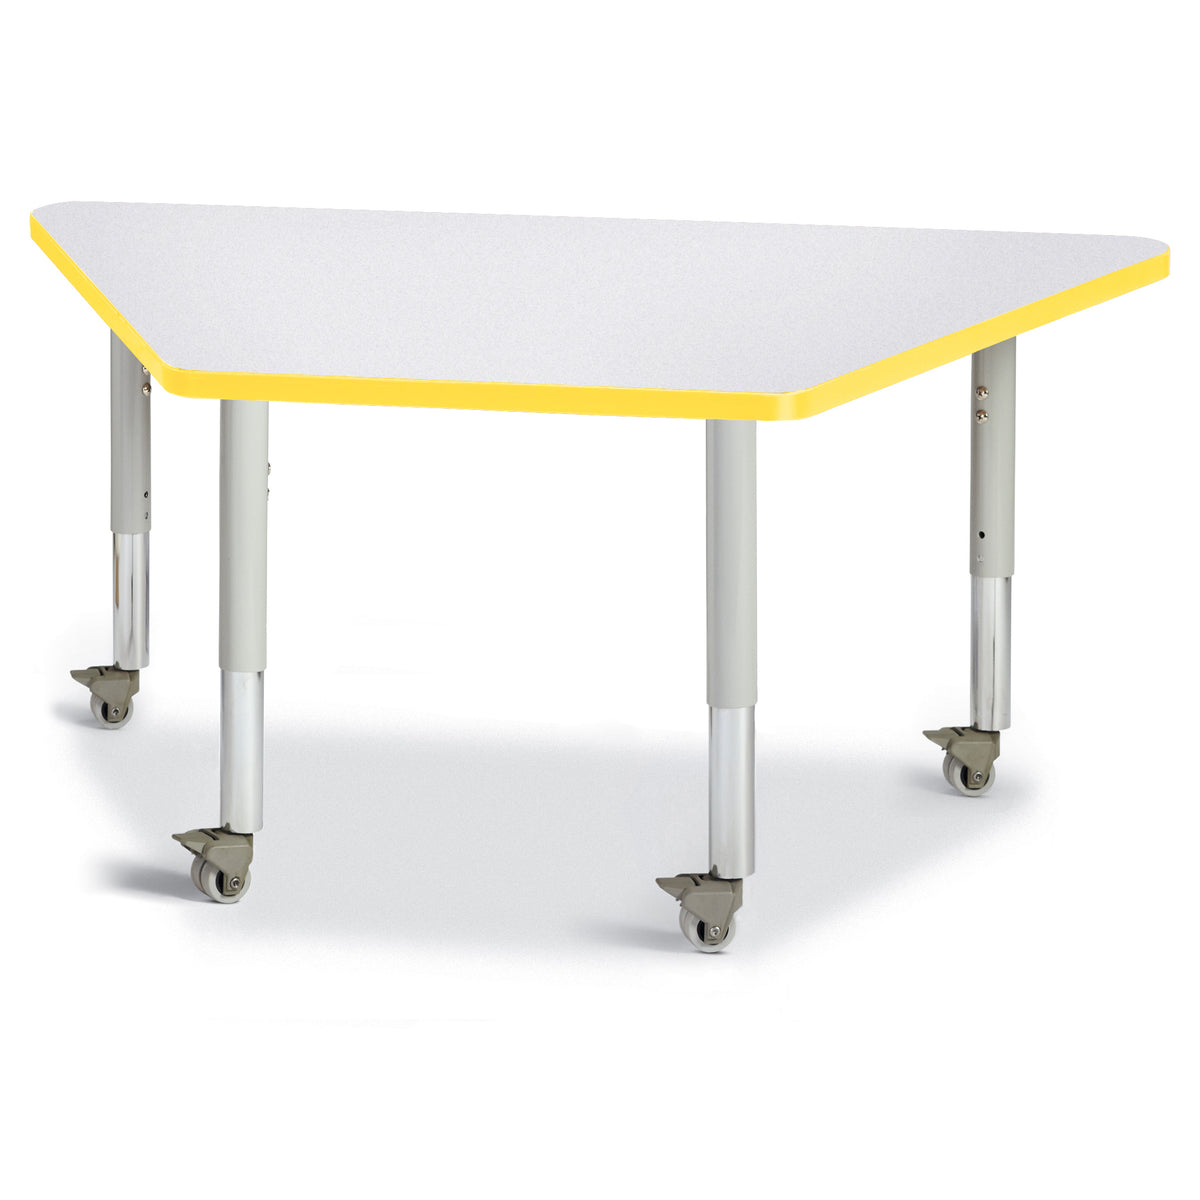 6438JCM007, Berries Trapezoid Activity Tables - 24" X 48", Mobile - Freckled Gray/Yellow/Gray